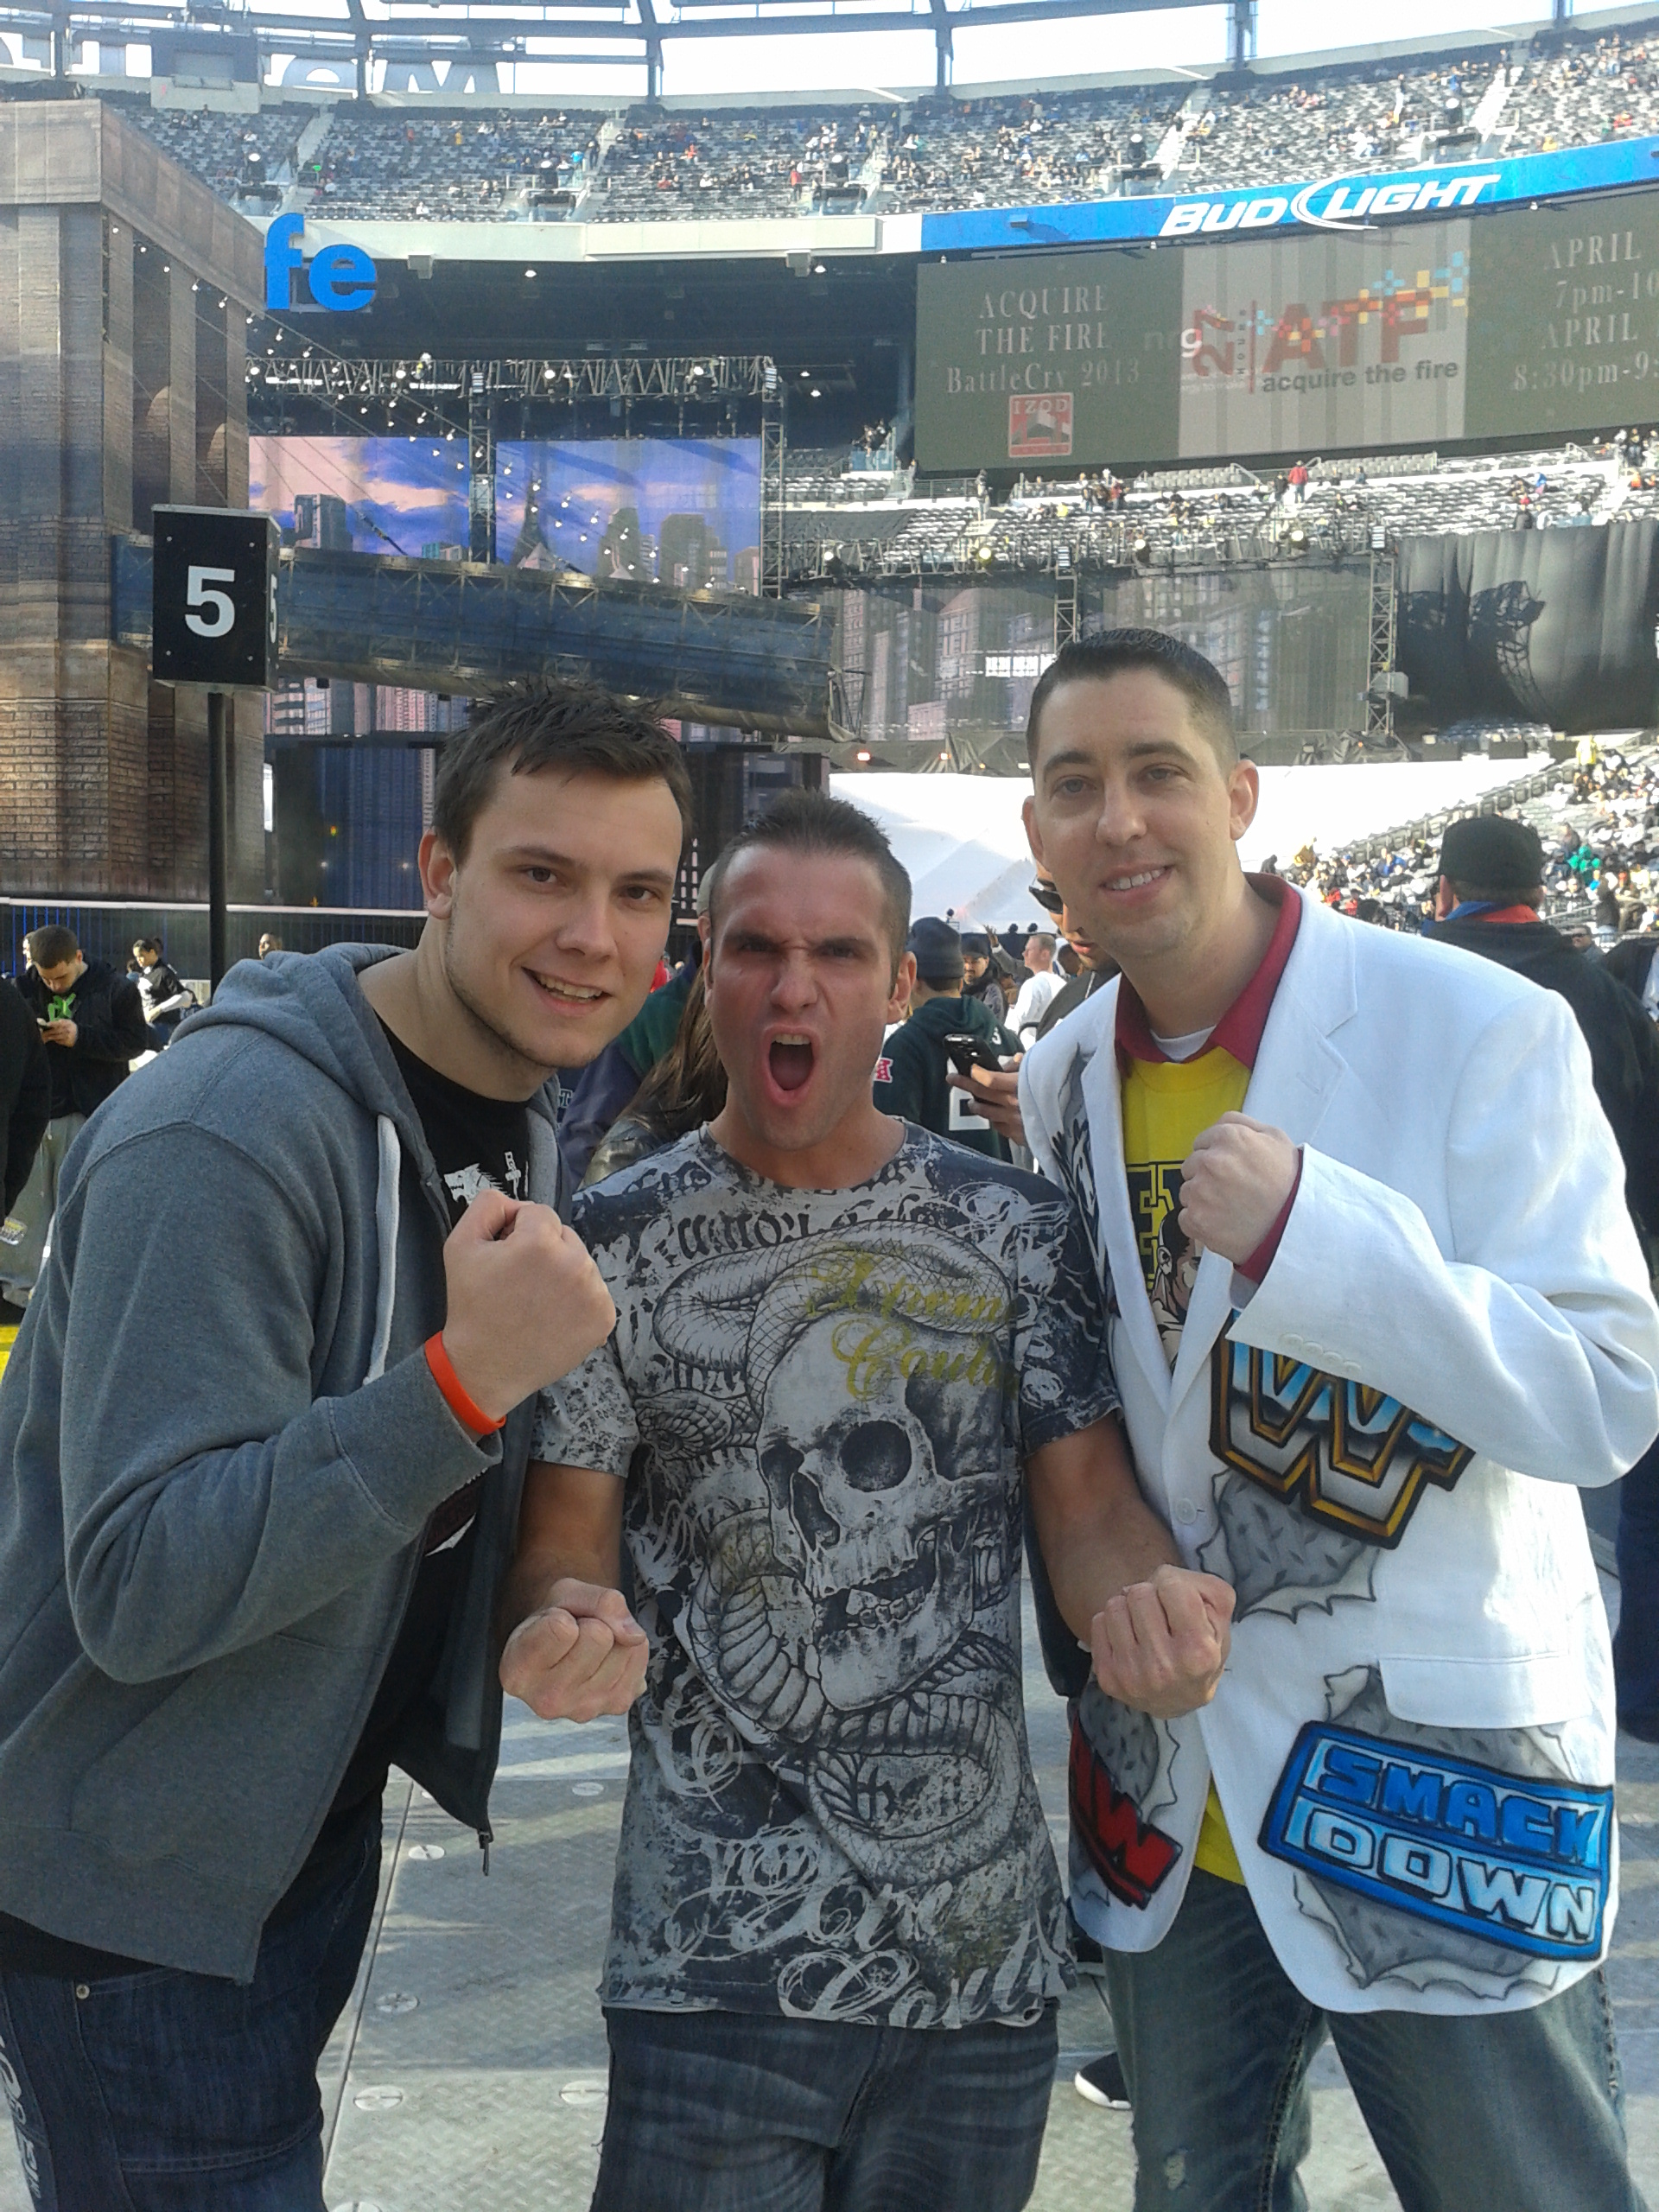 Me on the left at Wrestlemania 29 in NY/NJ